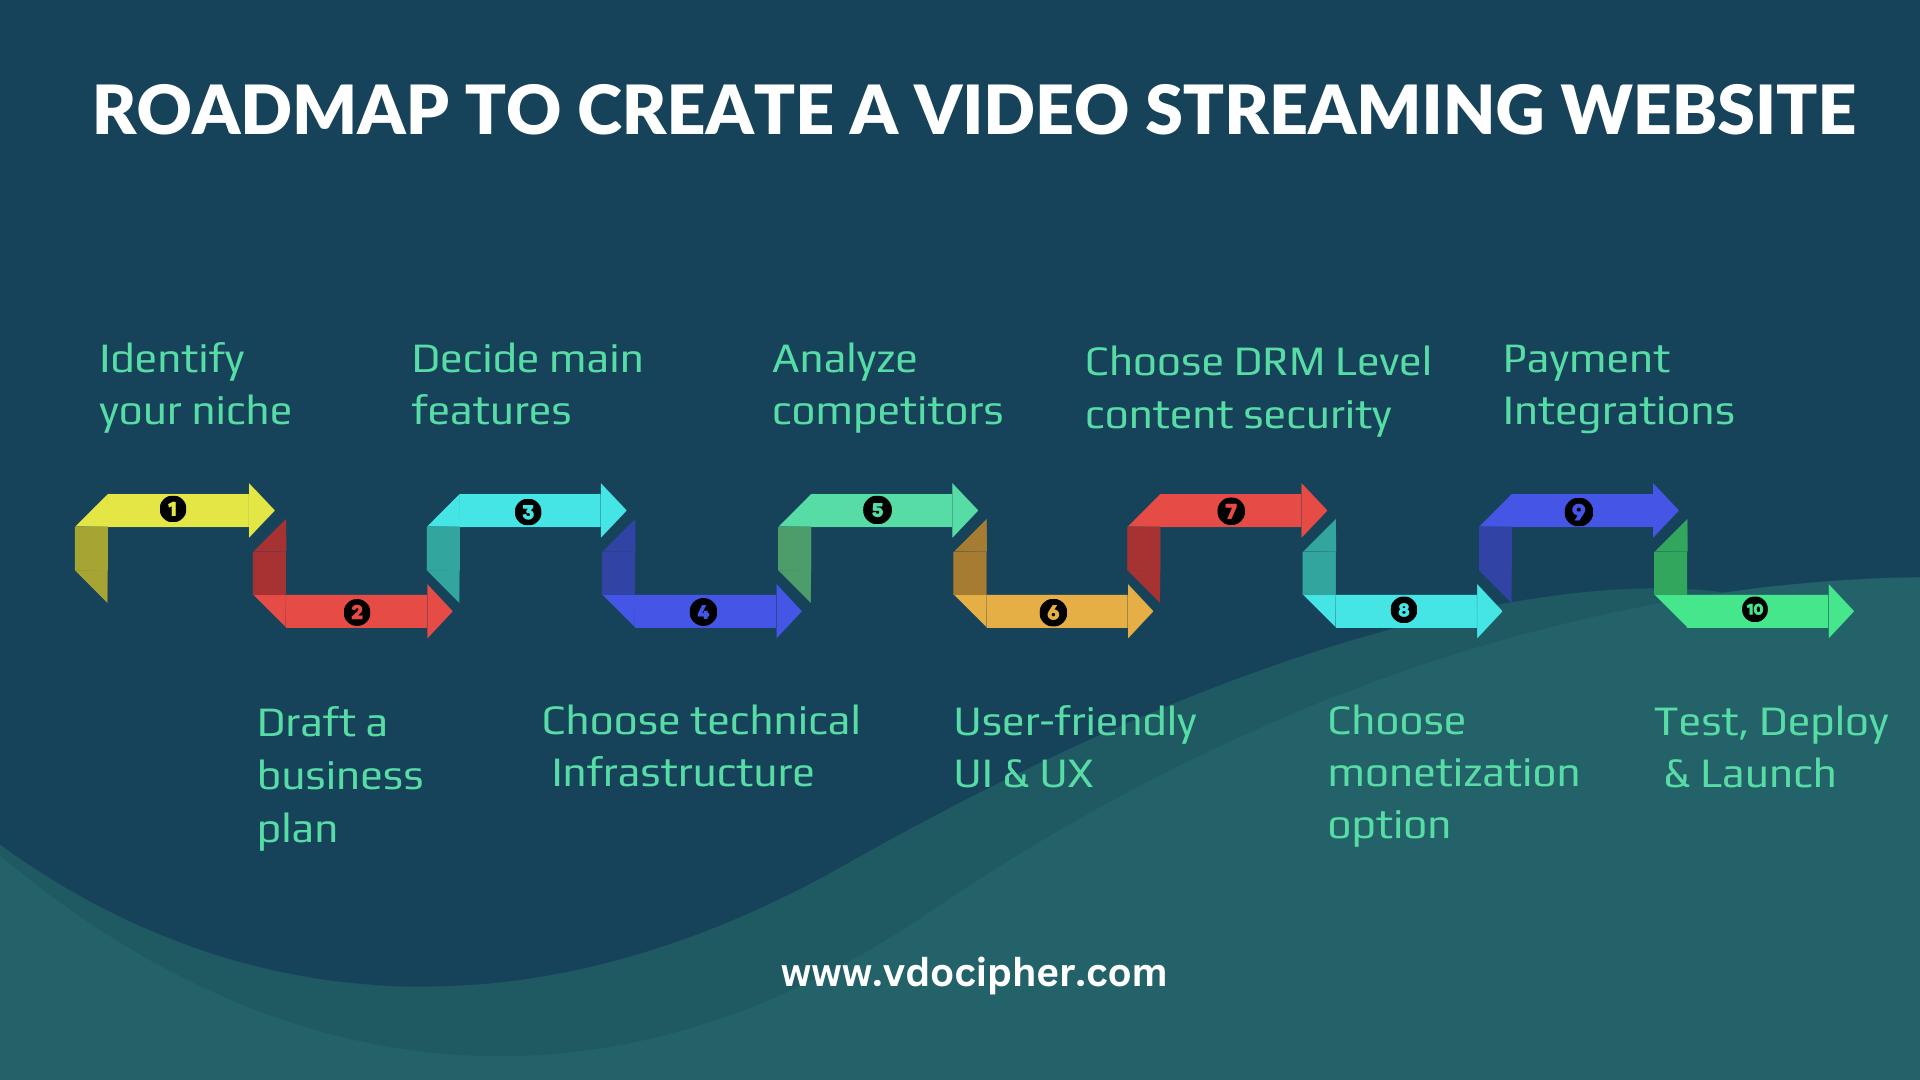 Road to create video streaming website infographic